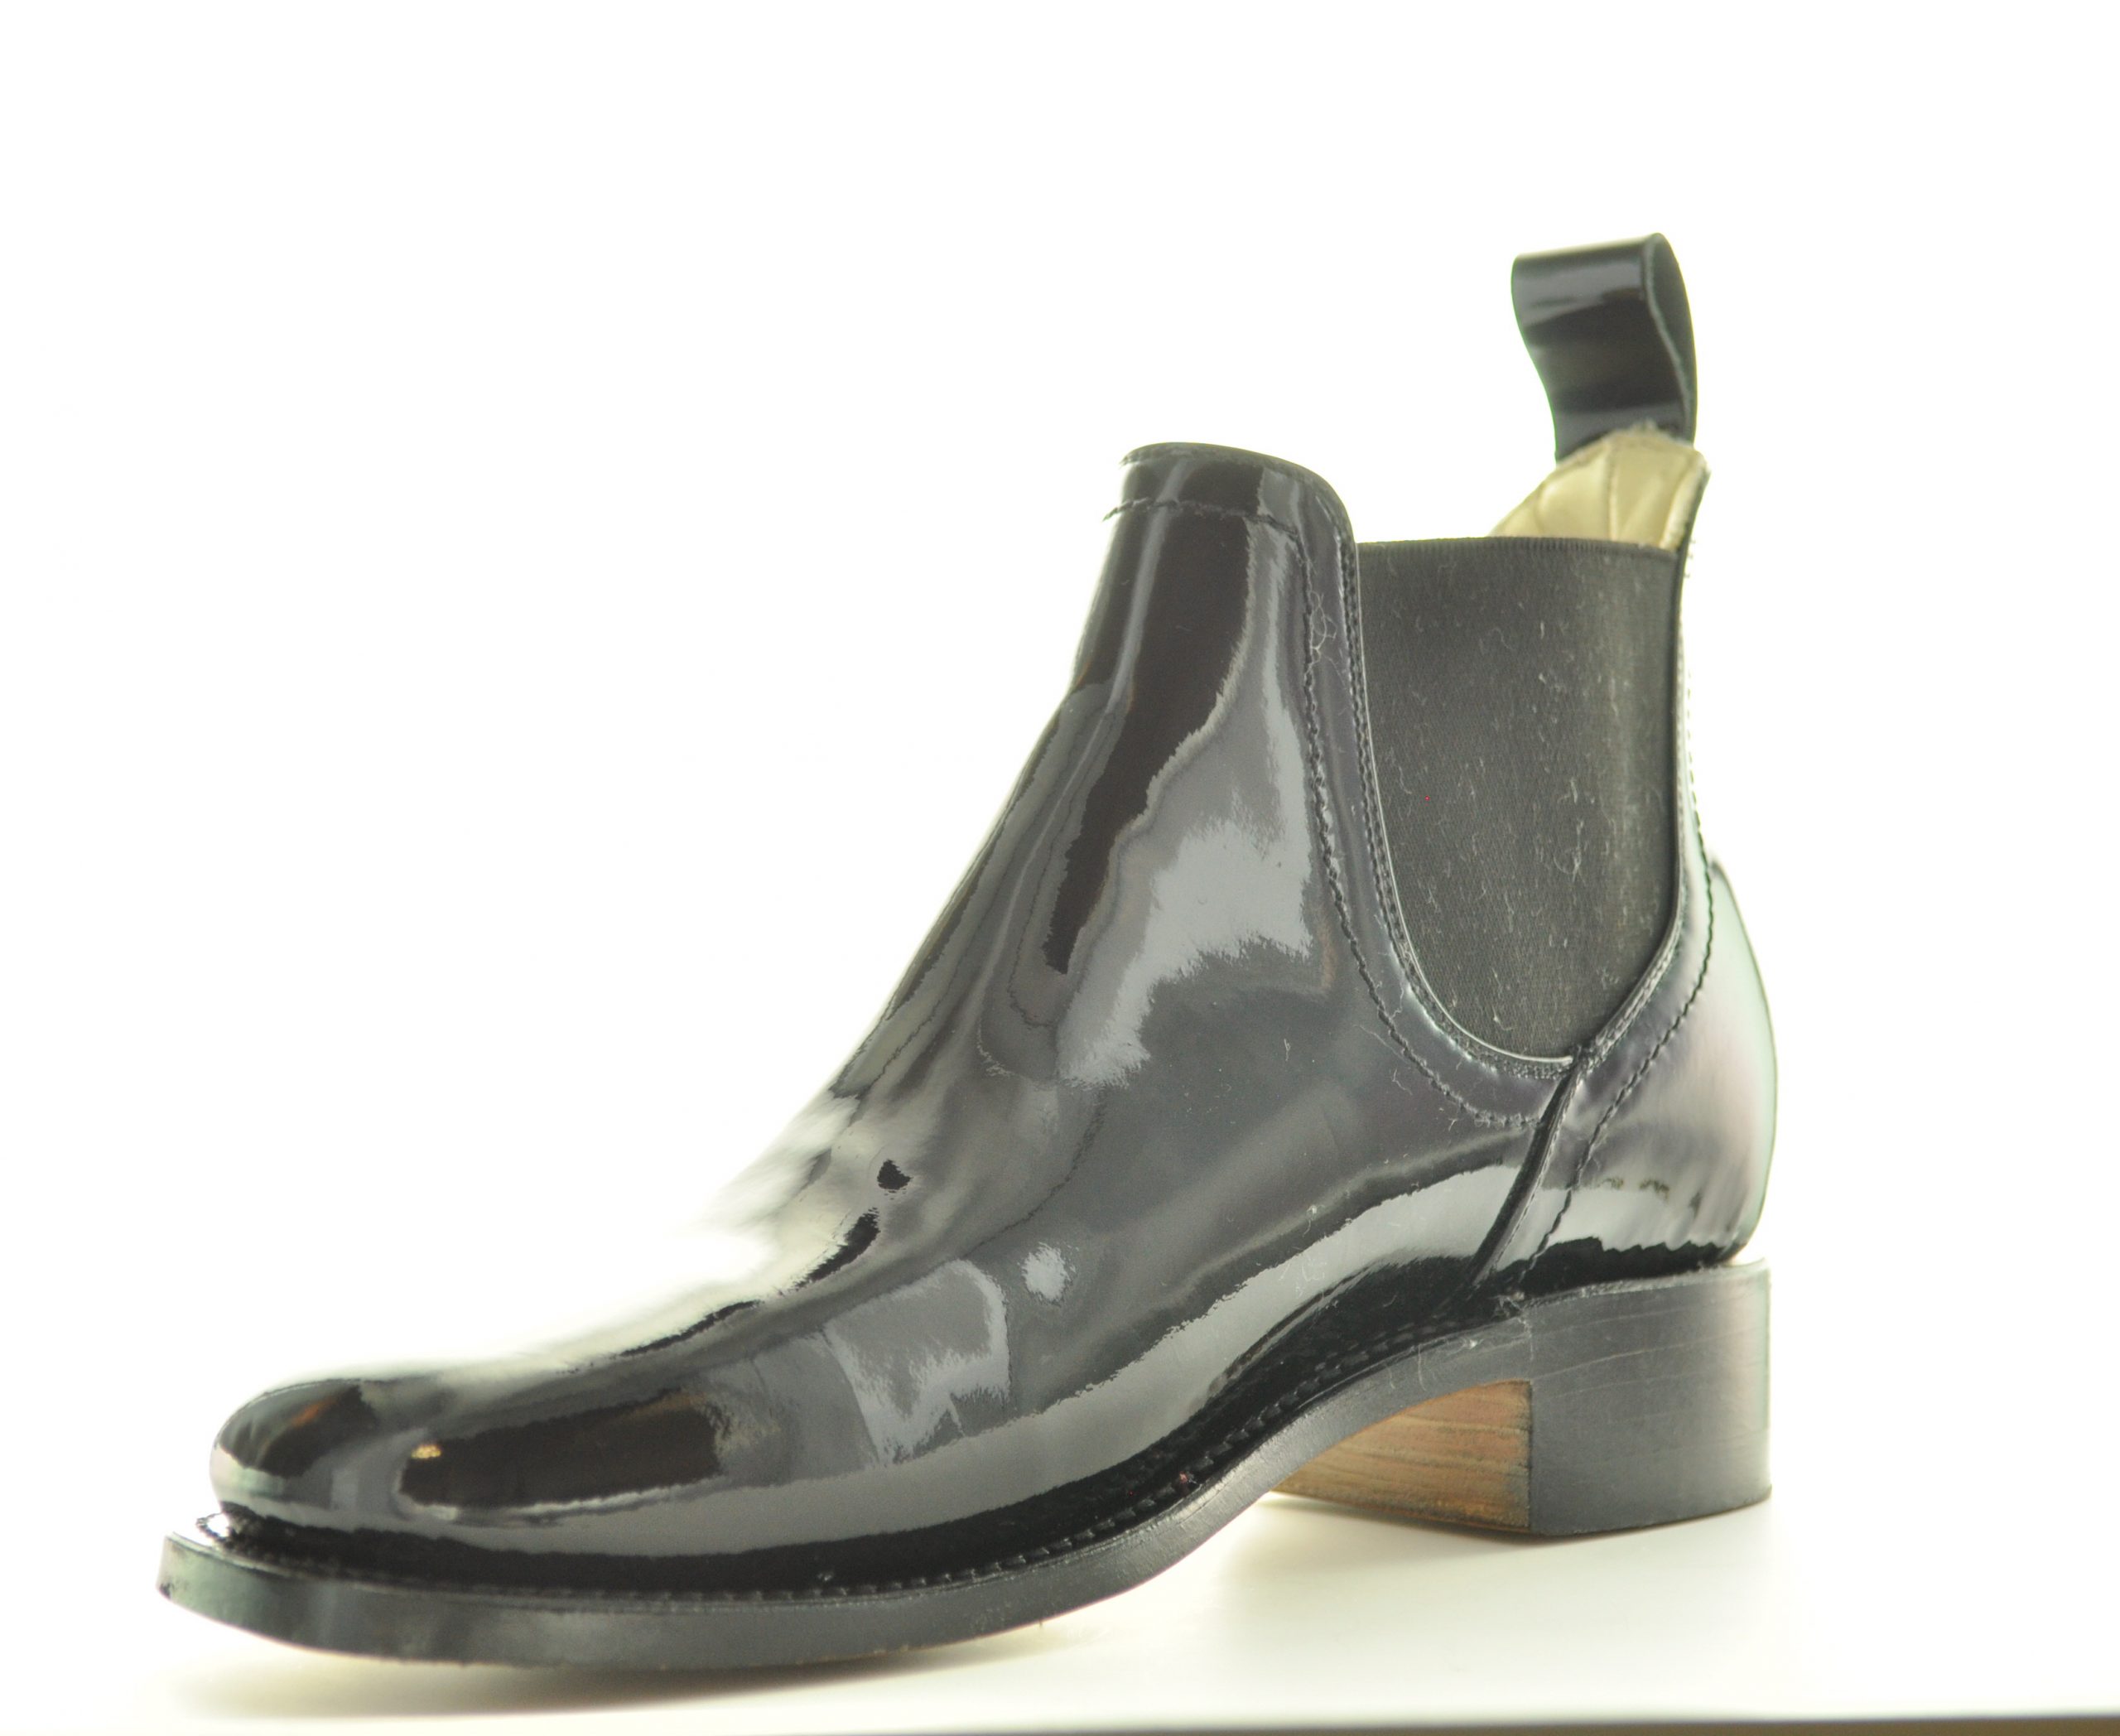 Patent Leather Congress Gaitor, Civil War Men’s pull-on Shoe